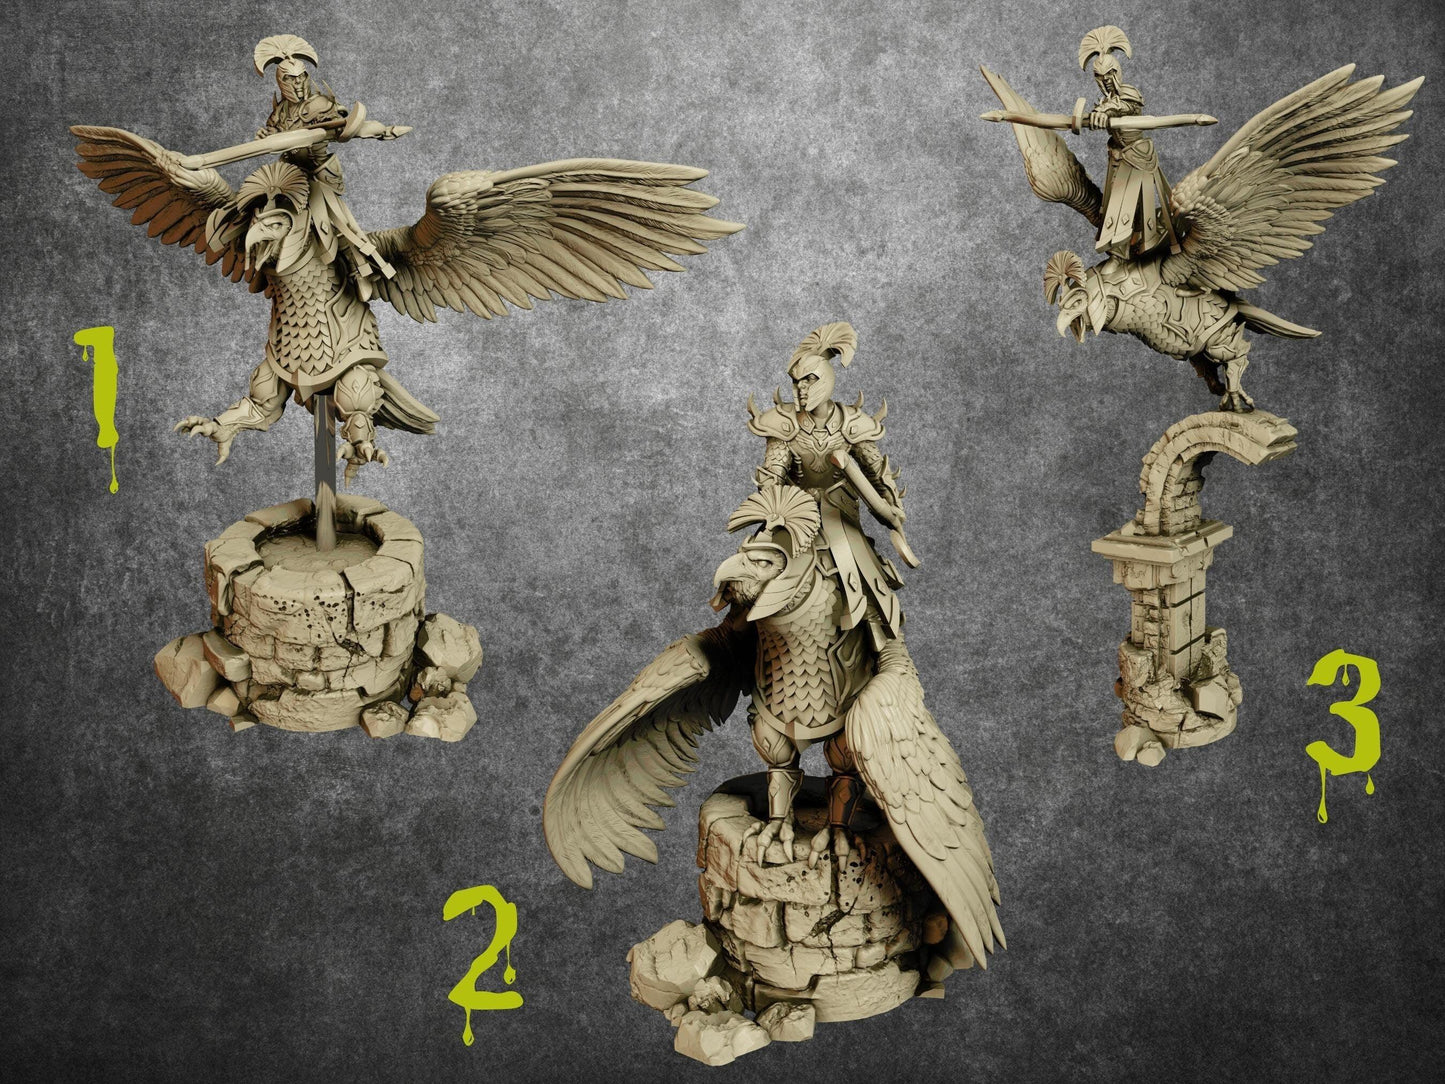 Elf Eagle Rider Miniature - 32mm scale Tabletop gaming DnD Miniature Dungeons and Dragons,elf archer ranger dnd 5e - Plague Miniatures shop for DnD Miniatures